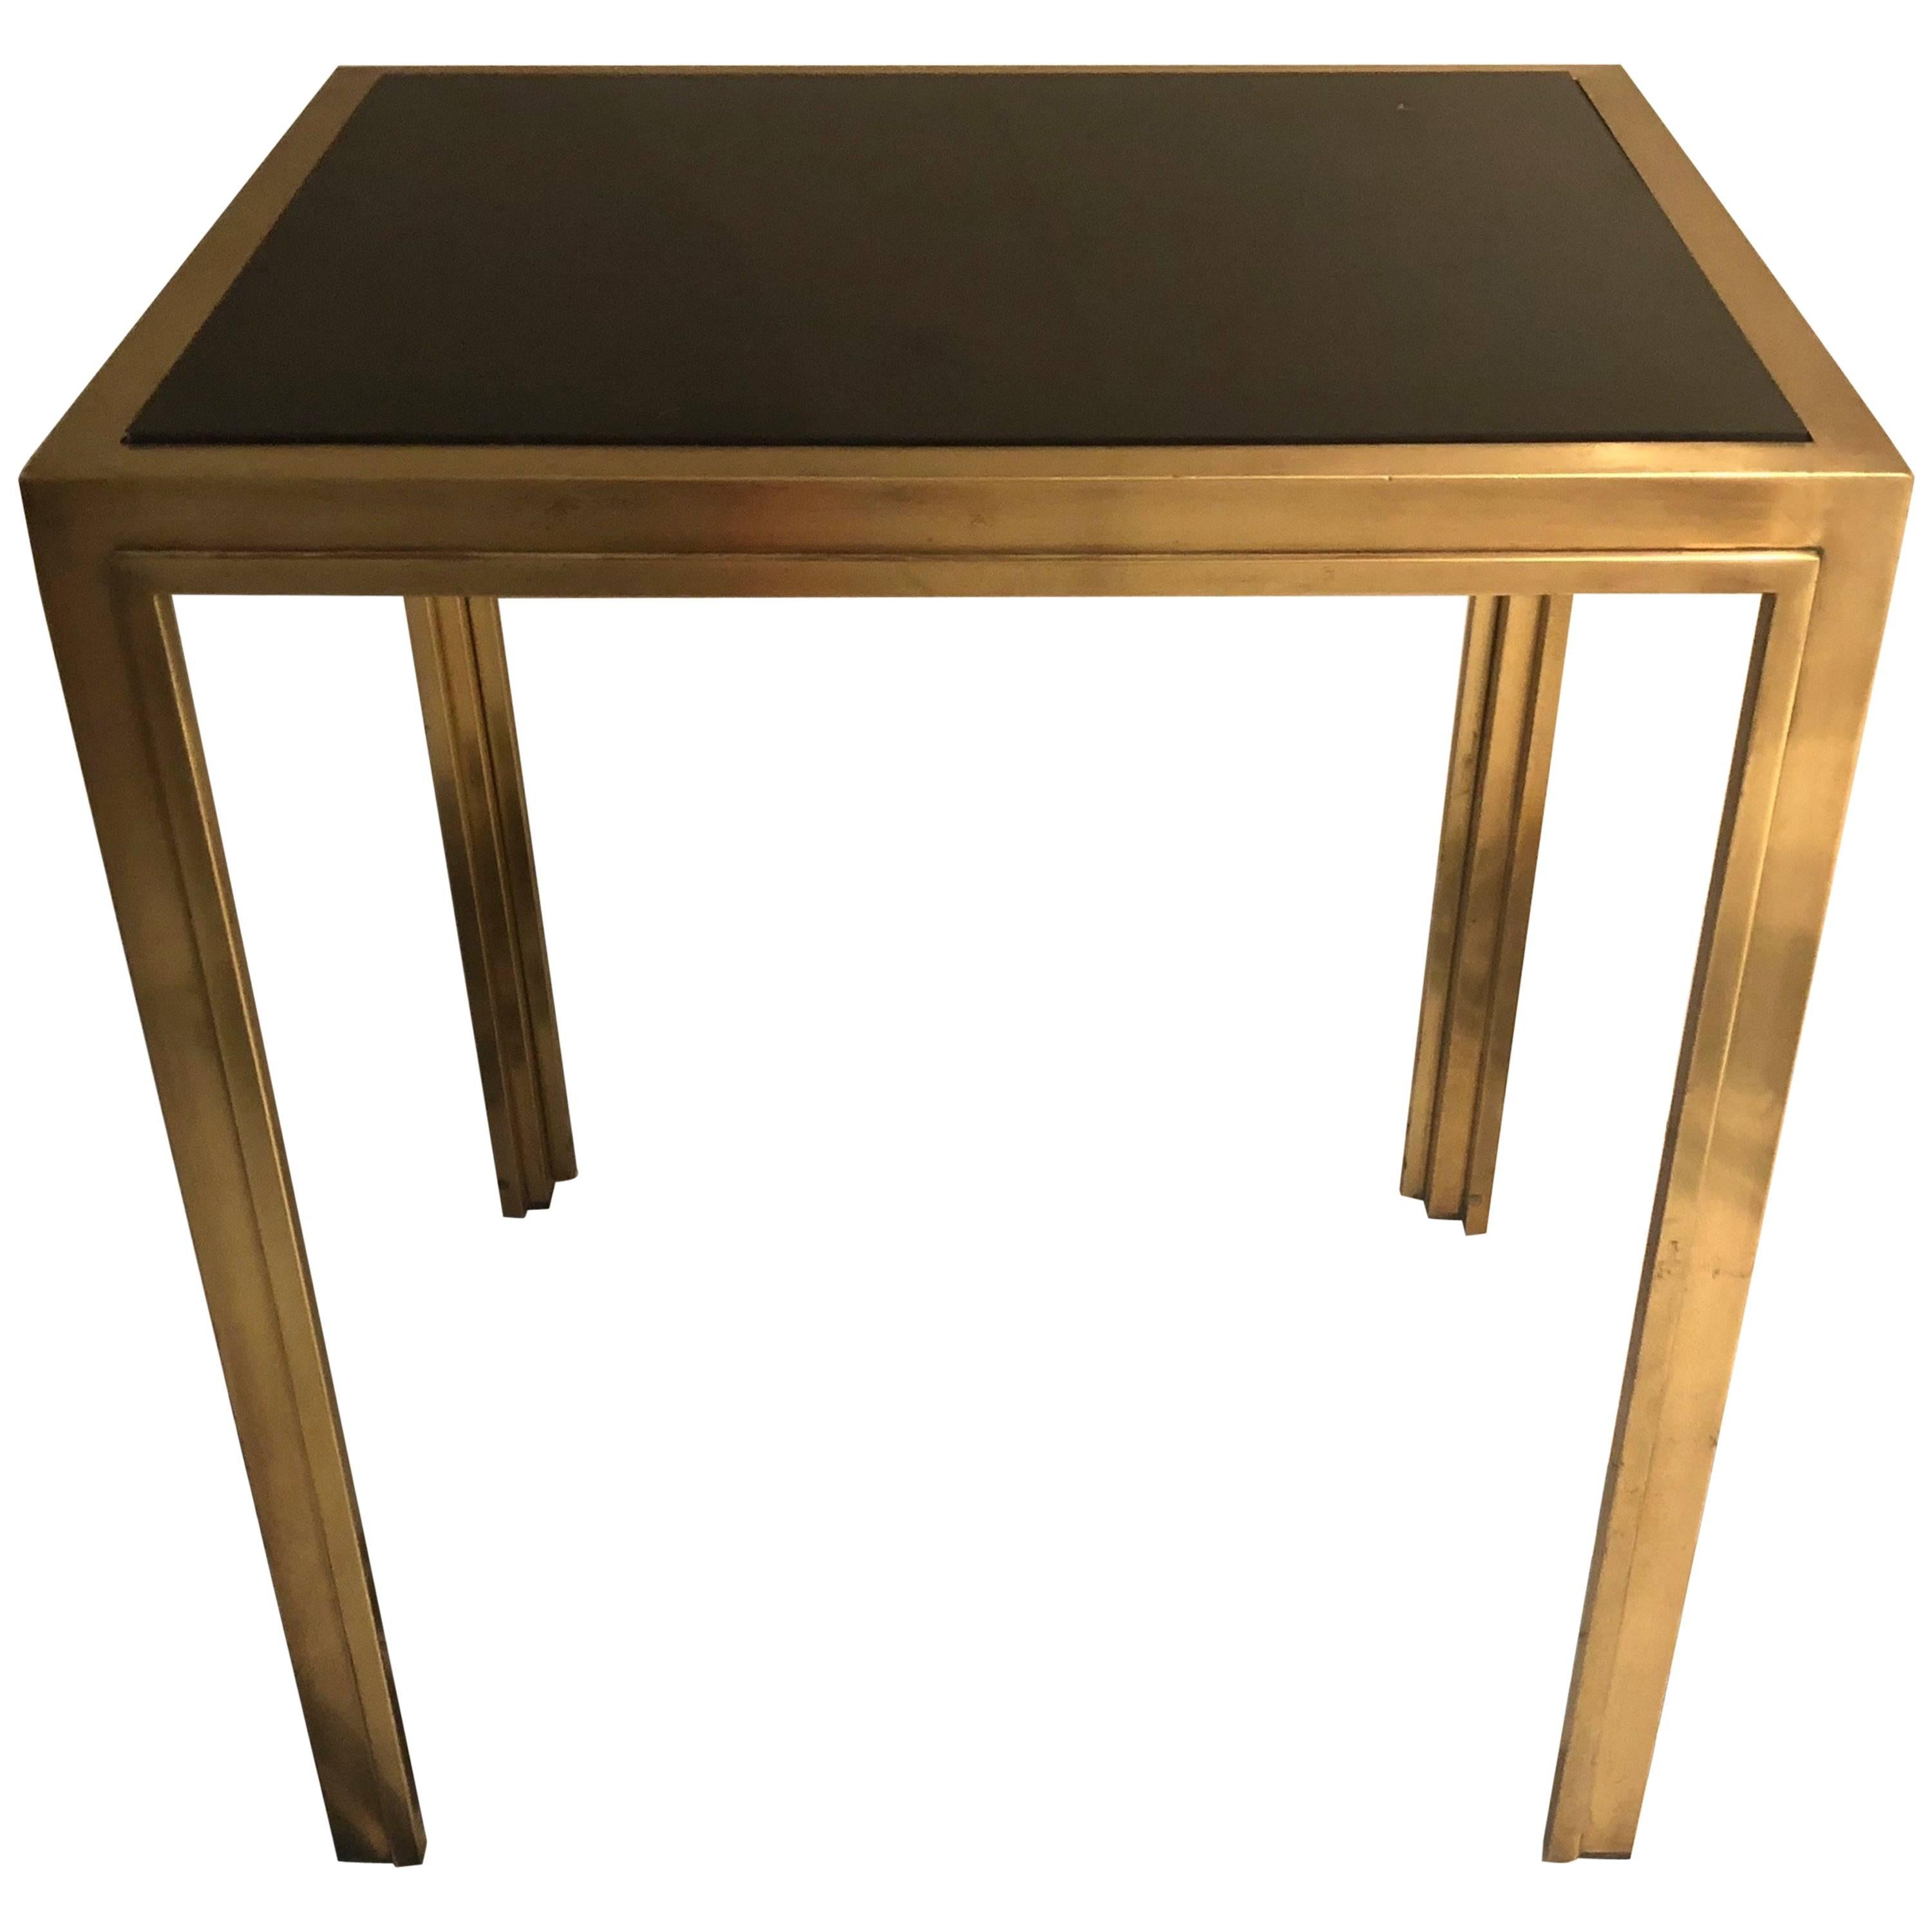 A pair of French deco side tables with an inset black glass top. Each table has the original brass over bronze finish with a decorative trim along the inside edges.
Tables were purchased in France and said to come from the lobby of a building in